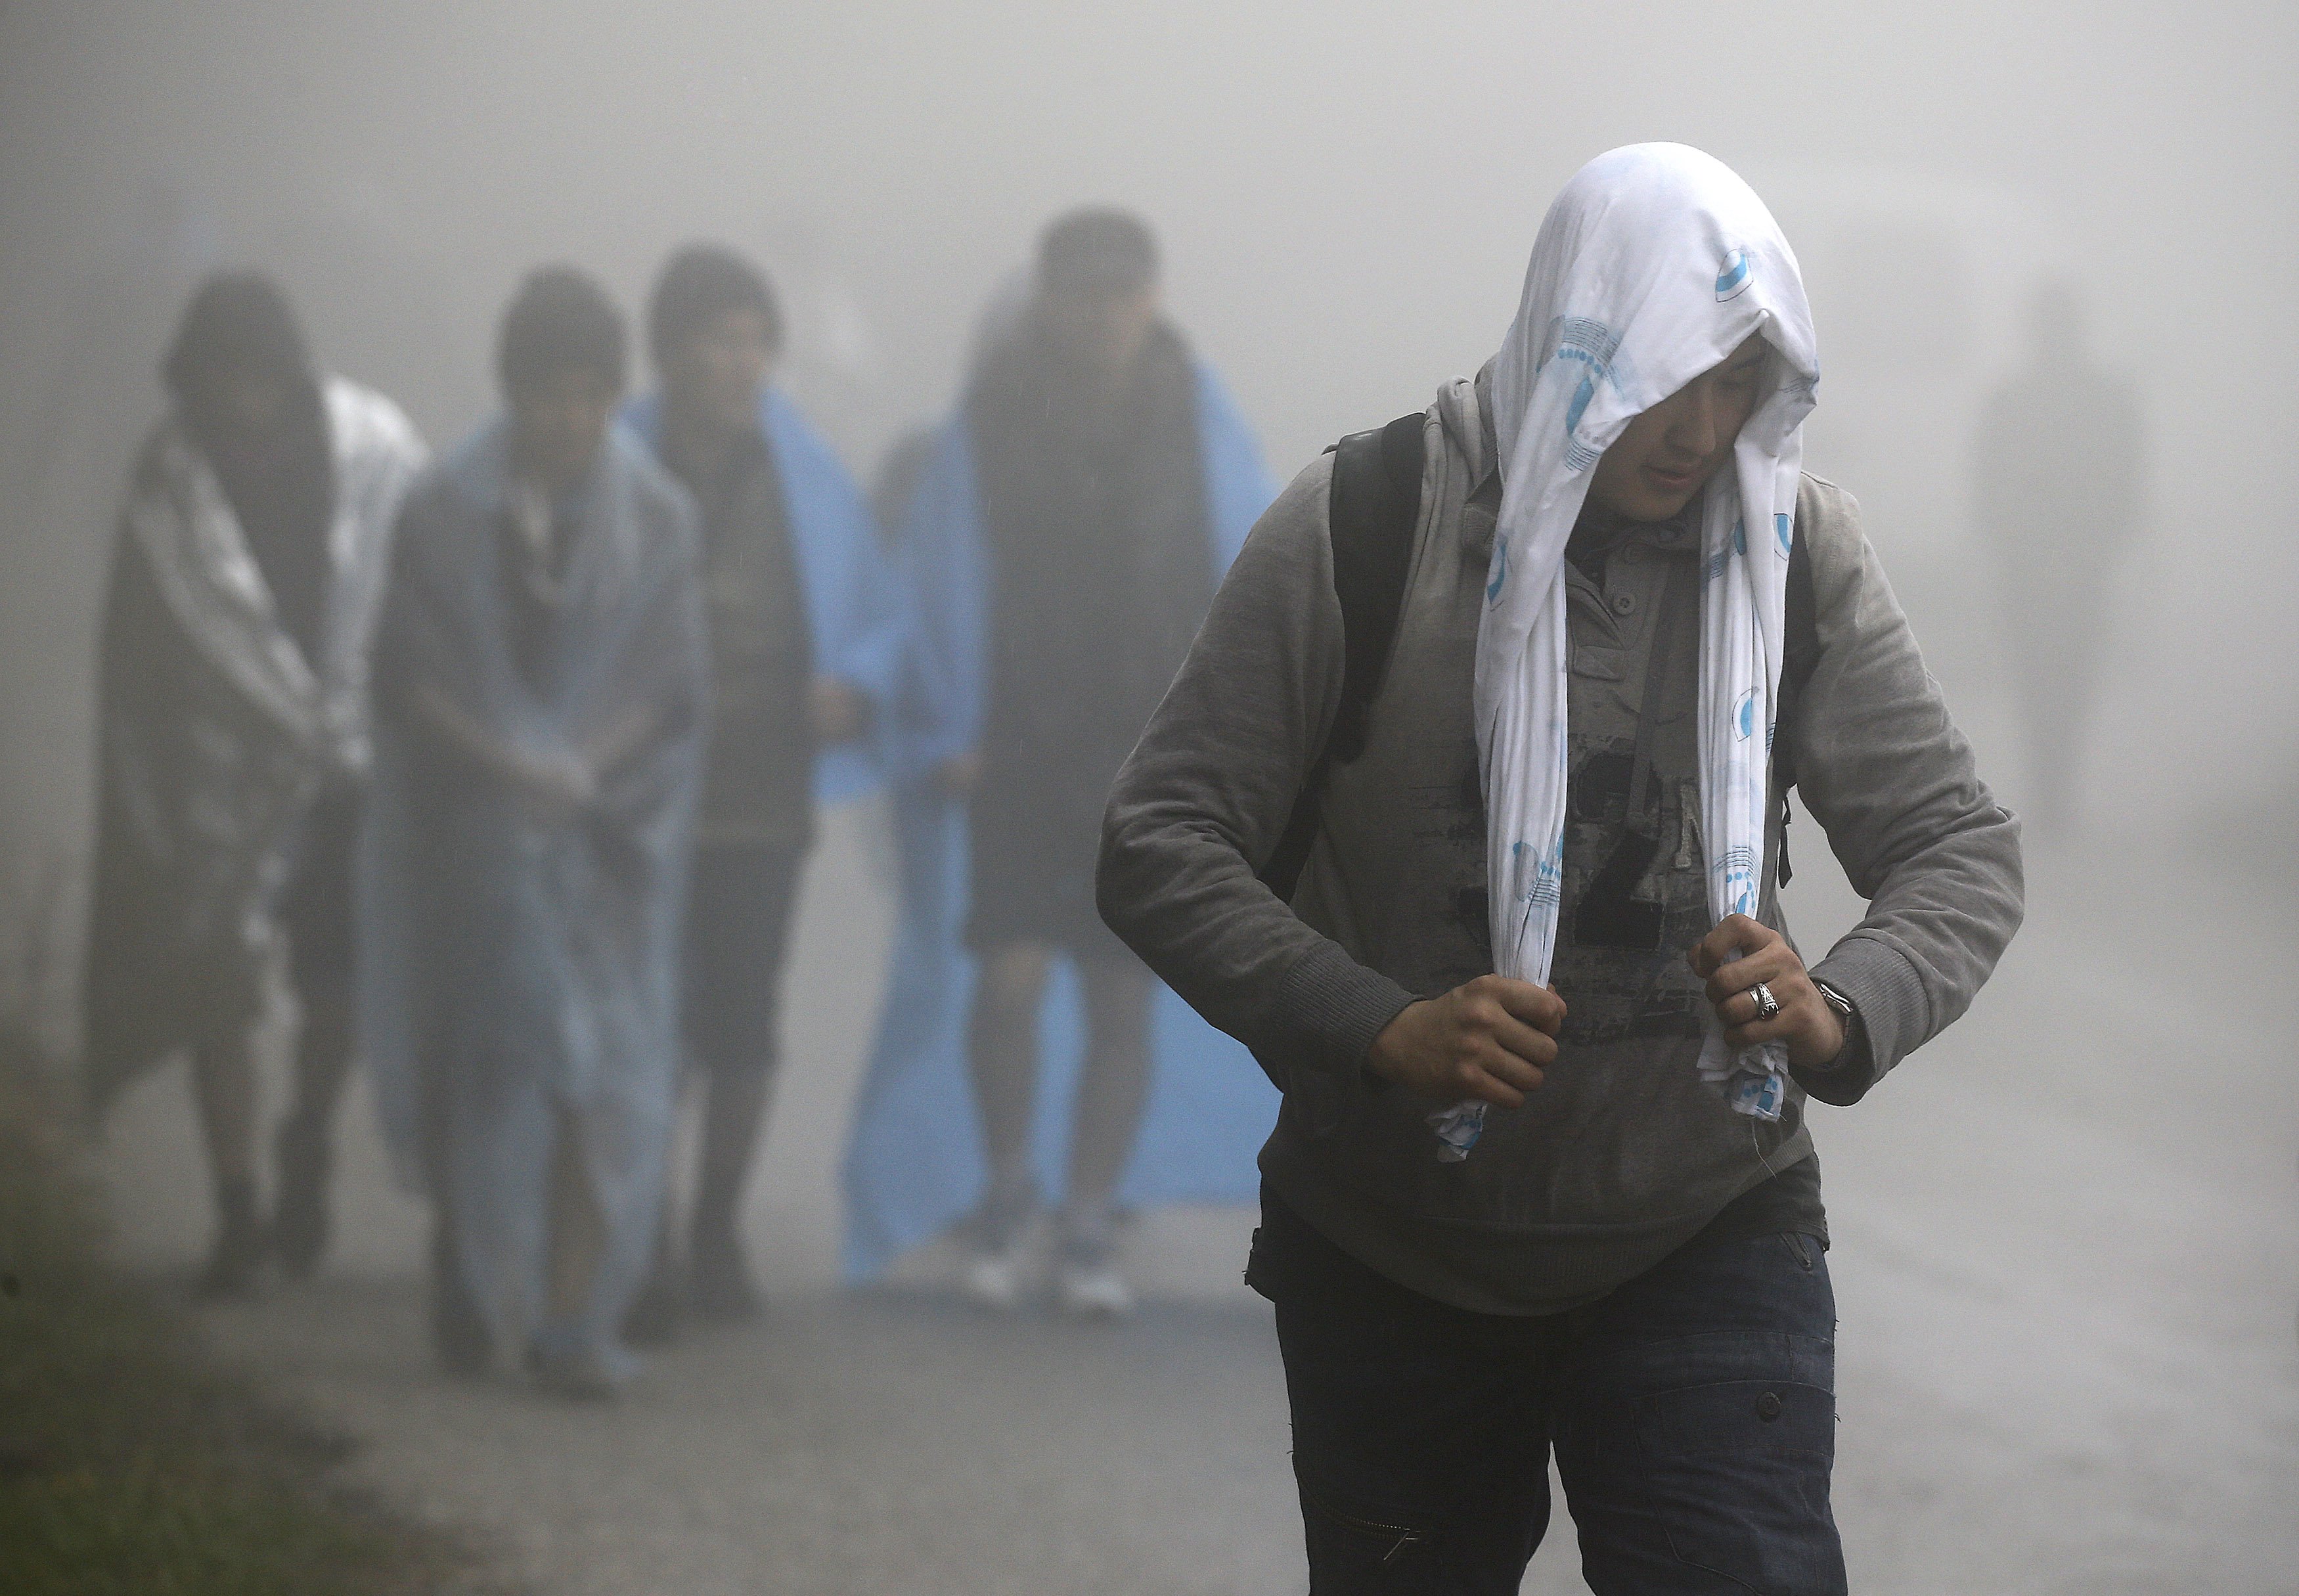 Afghan migrants walk through rain and fog on their way to the nearest registration camp on the Greek island of Lesbos. The world is, once again, in a time of great turbulence, transition and opportunity. Photo: Reuters